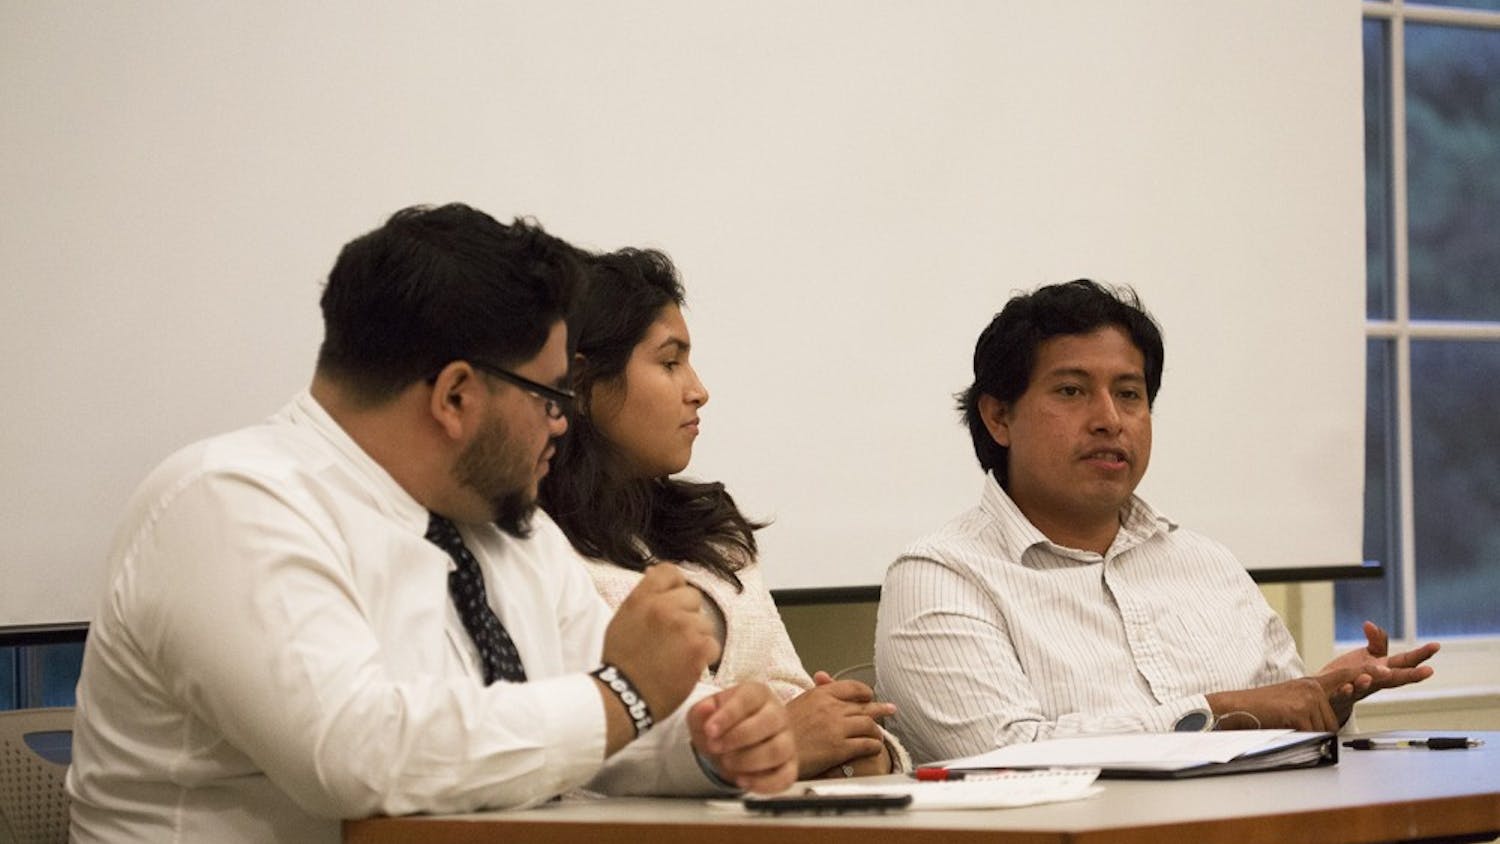 Carolina Hispanic Association (CHipsA) panelists Manny Amaya, left, Cecilia Polanco, and Emilio Vicente speak to members of the UNC-Chapel Hill chapter of the NAACP in the Upendo Lounge at SASB North.